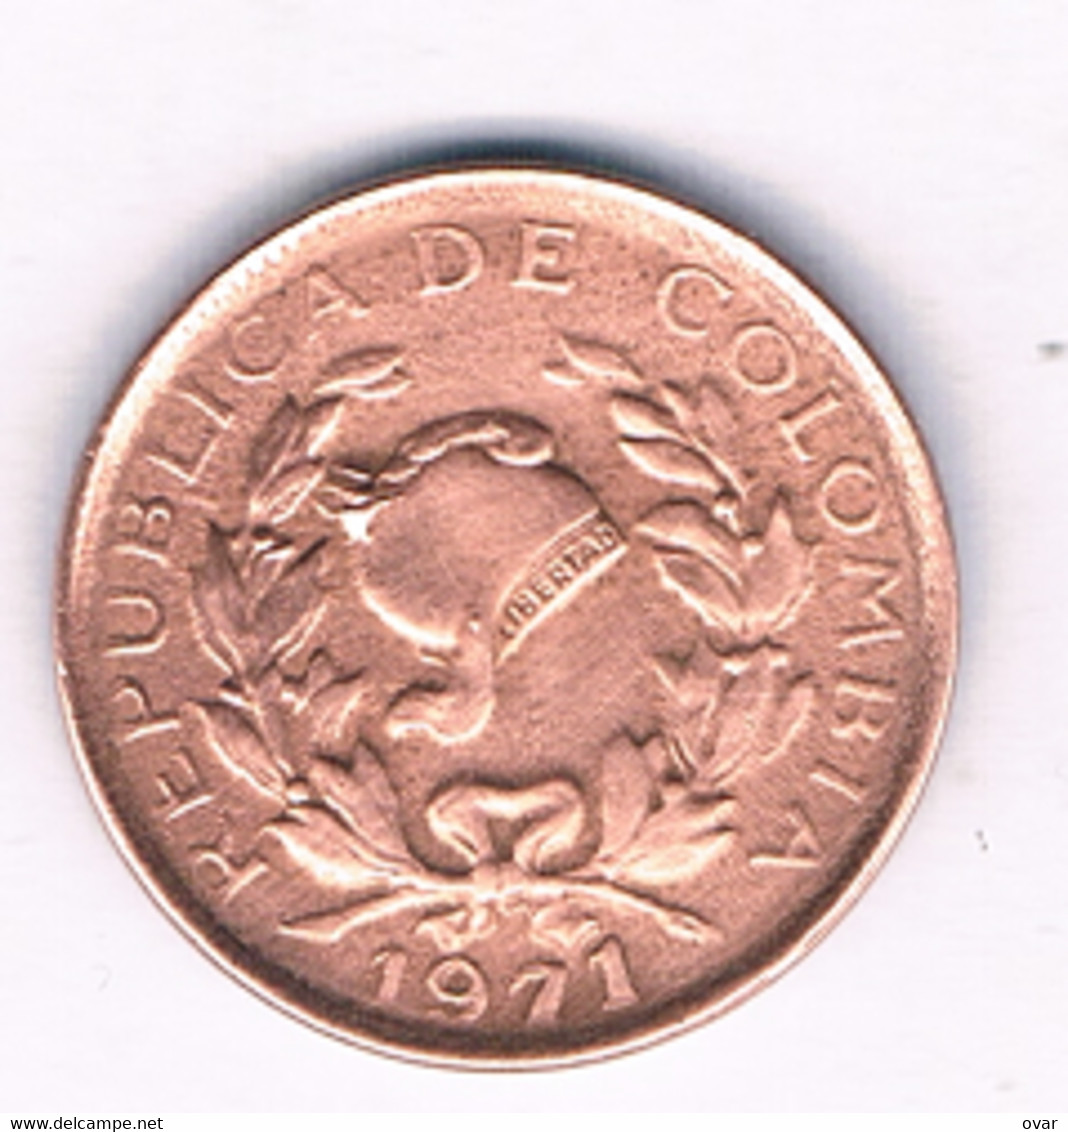 1 CENTAVO 1971 COLOMBIA /7221/ - Colombia